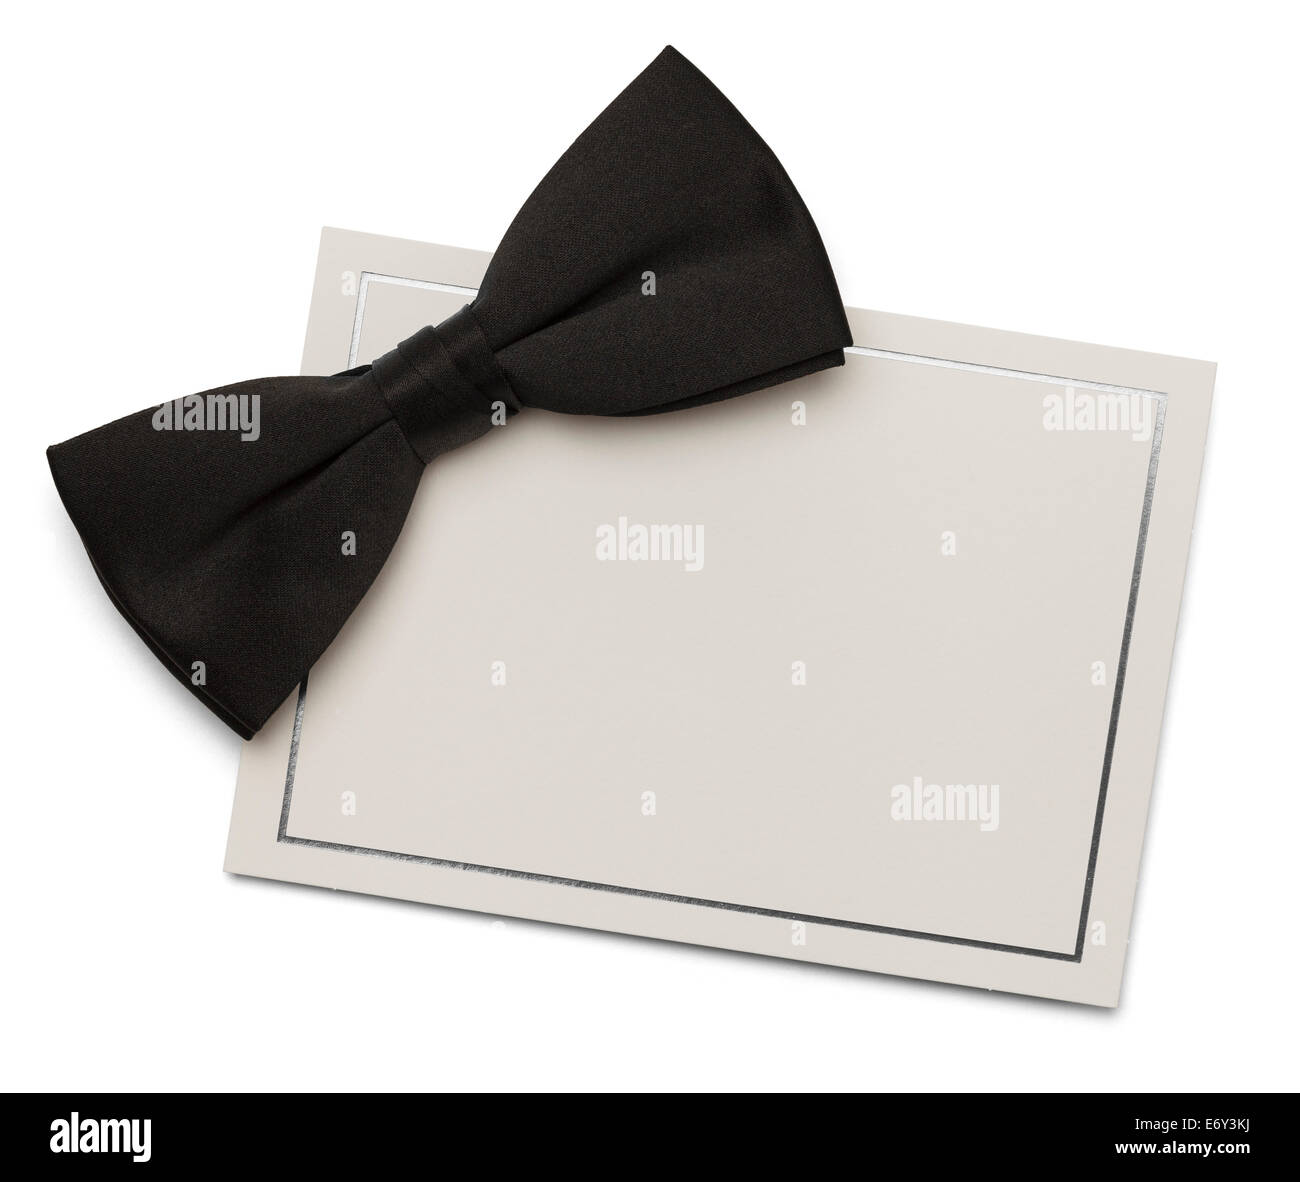 Bow Tie and Card Isolated on White Background. Stock Photo